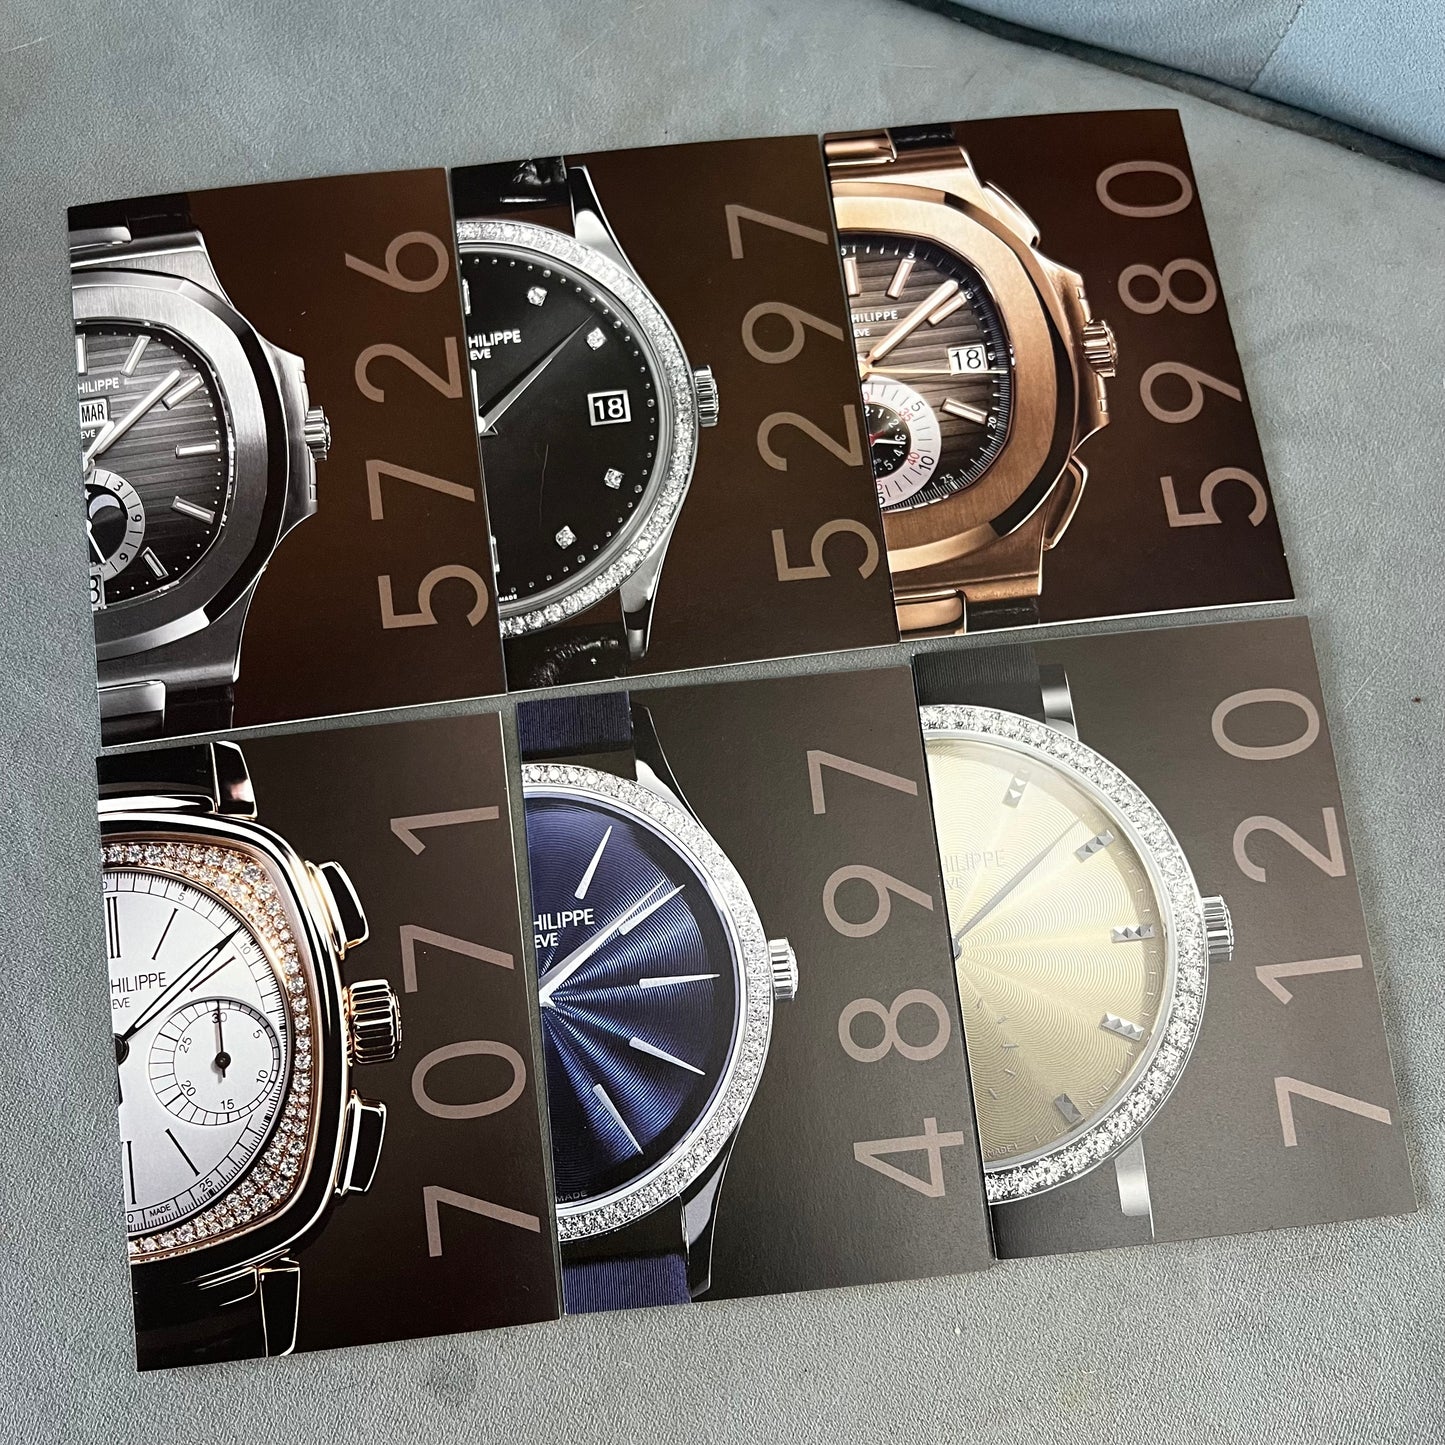 PATEK PHILIPPE New Models 2010 Set of 22 Cards   6.30x4.5x1.5 inches